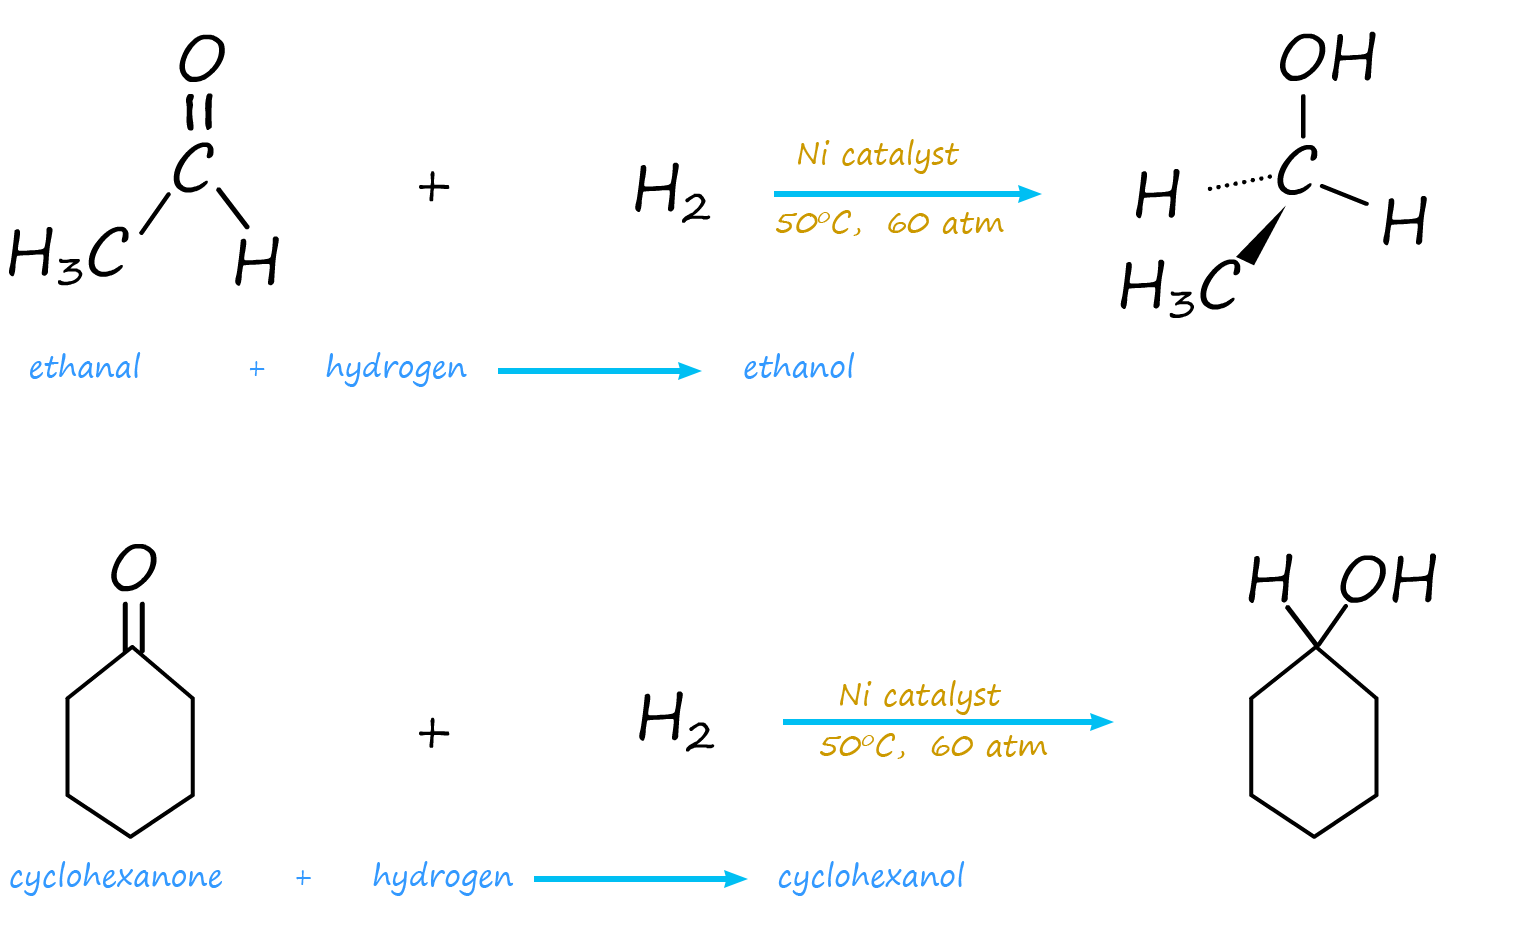 equations to show the hydrogenation of aldehydes and 
ketones